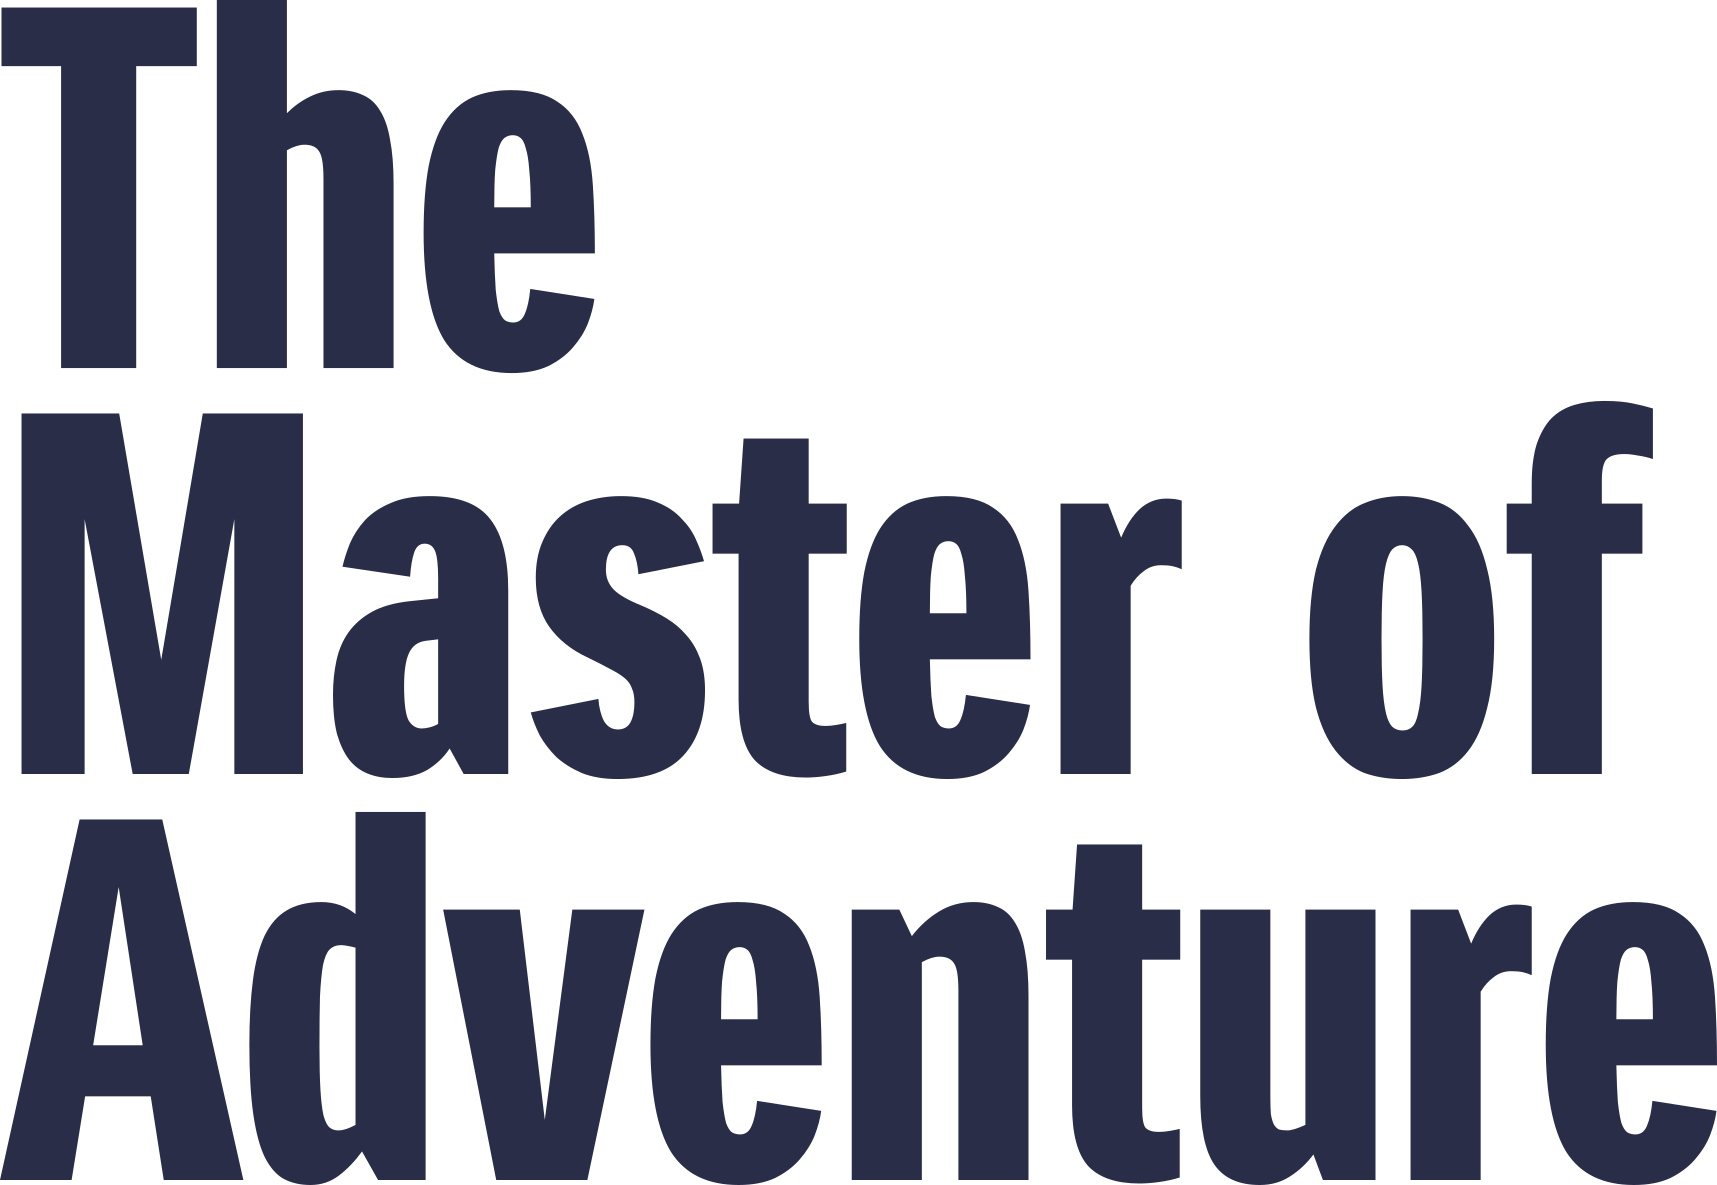 The Master of Adventure